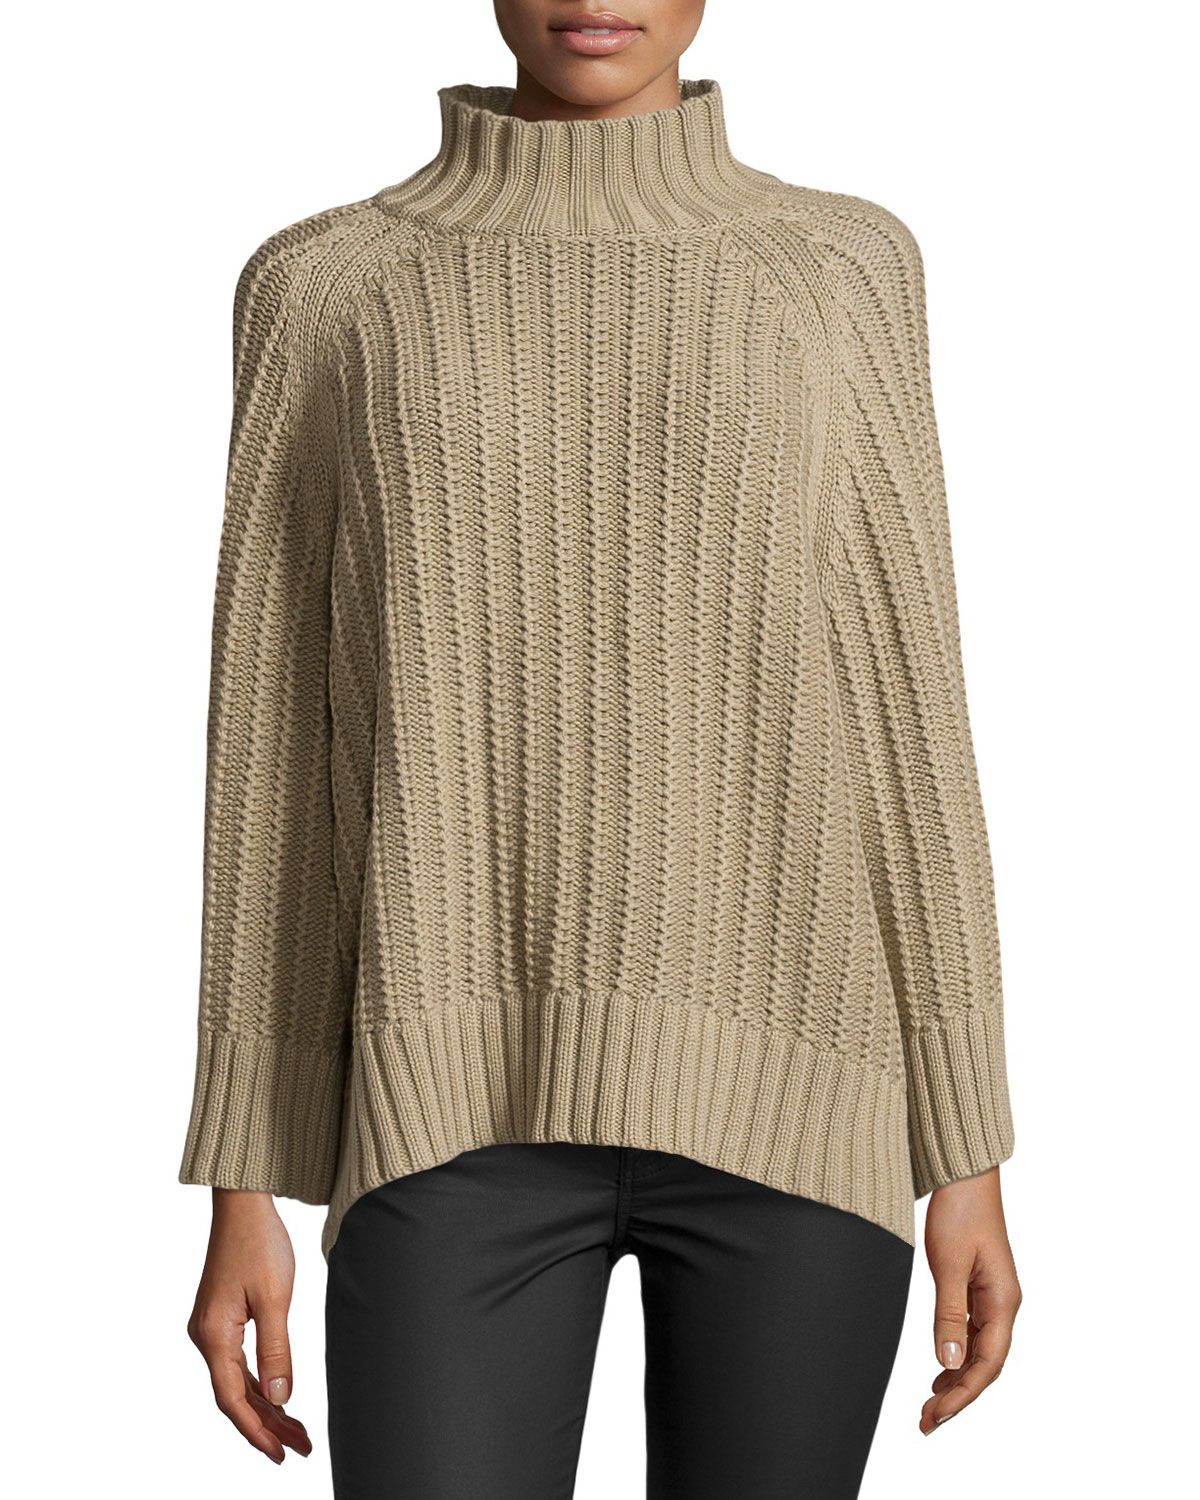 Lyst - Michael kors Ribbed Shaker-knit Sweater in Natural